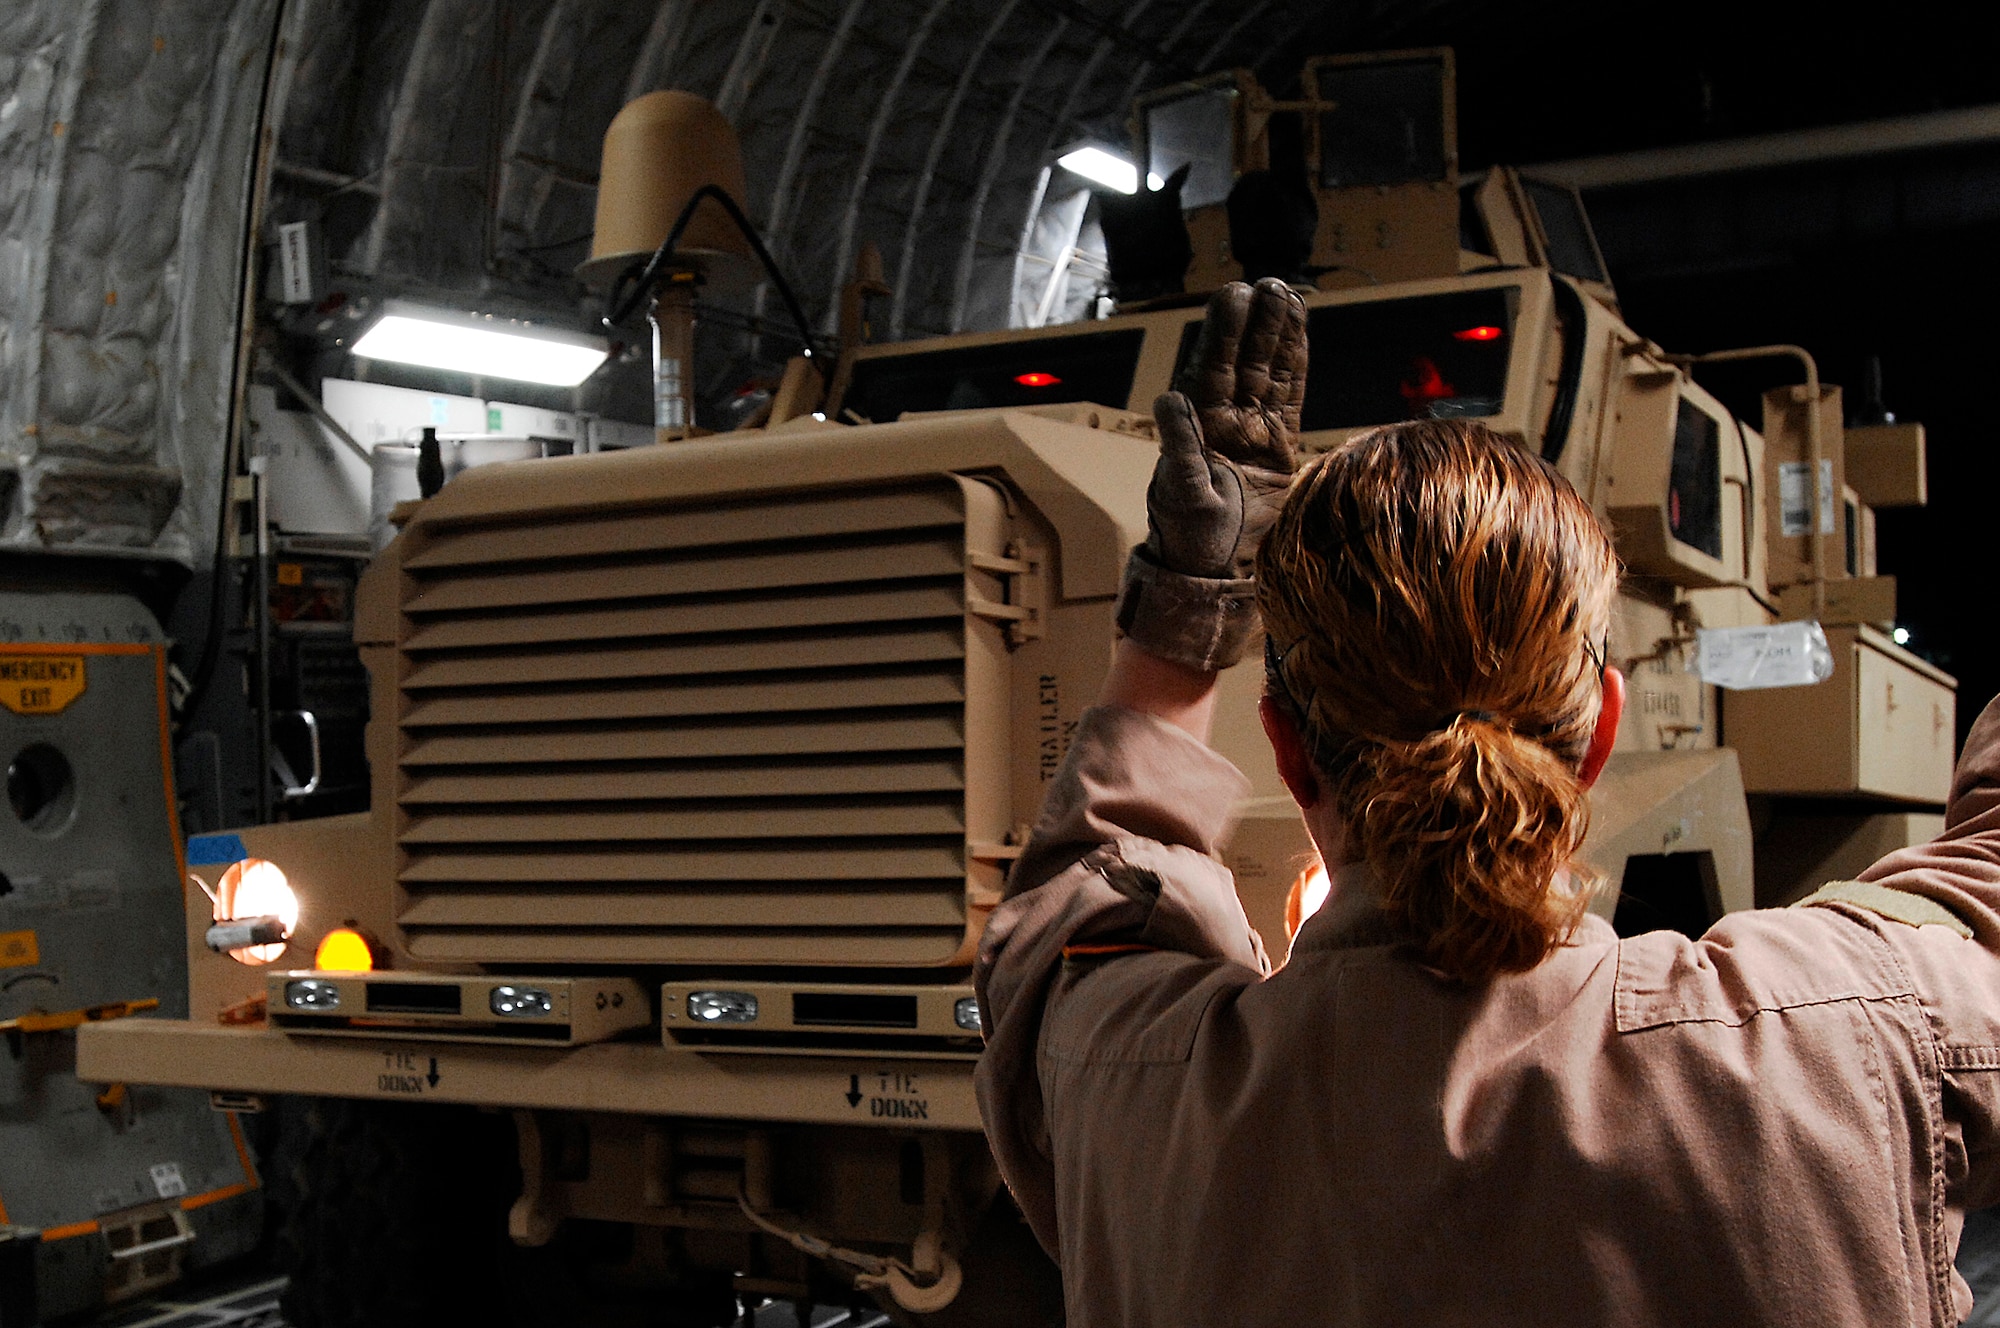 SOUTHWEST ASIA -- Senior Airman Leah Farias, a C-17 loadmaster with the 816th Expeditionary Airlift Squadron, marshals a Mine Resistant Ambush Protected vehicle into the cargo bay of a Globemaster III aircraft at a Southwest Asia air base Feb. 8, 2008. The MRAP vehicles are a family of armored fighting vehicles designed to survive various types of improvised explosive device attacks and ambushes. These MRAP vehicles are being delivered to the Marine Corps throughout the area of responsibility in support of Operation Iraqi Freedom. (U.S. Air Force photo/ Staff Sergeant Patrick Dixon)